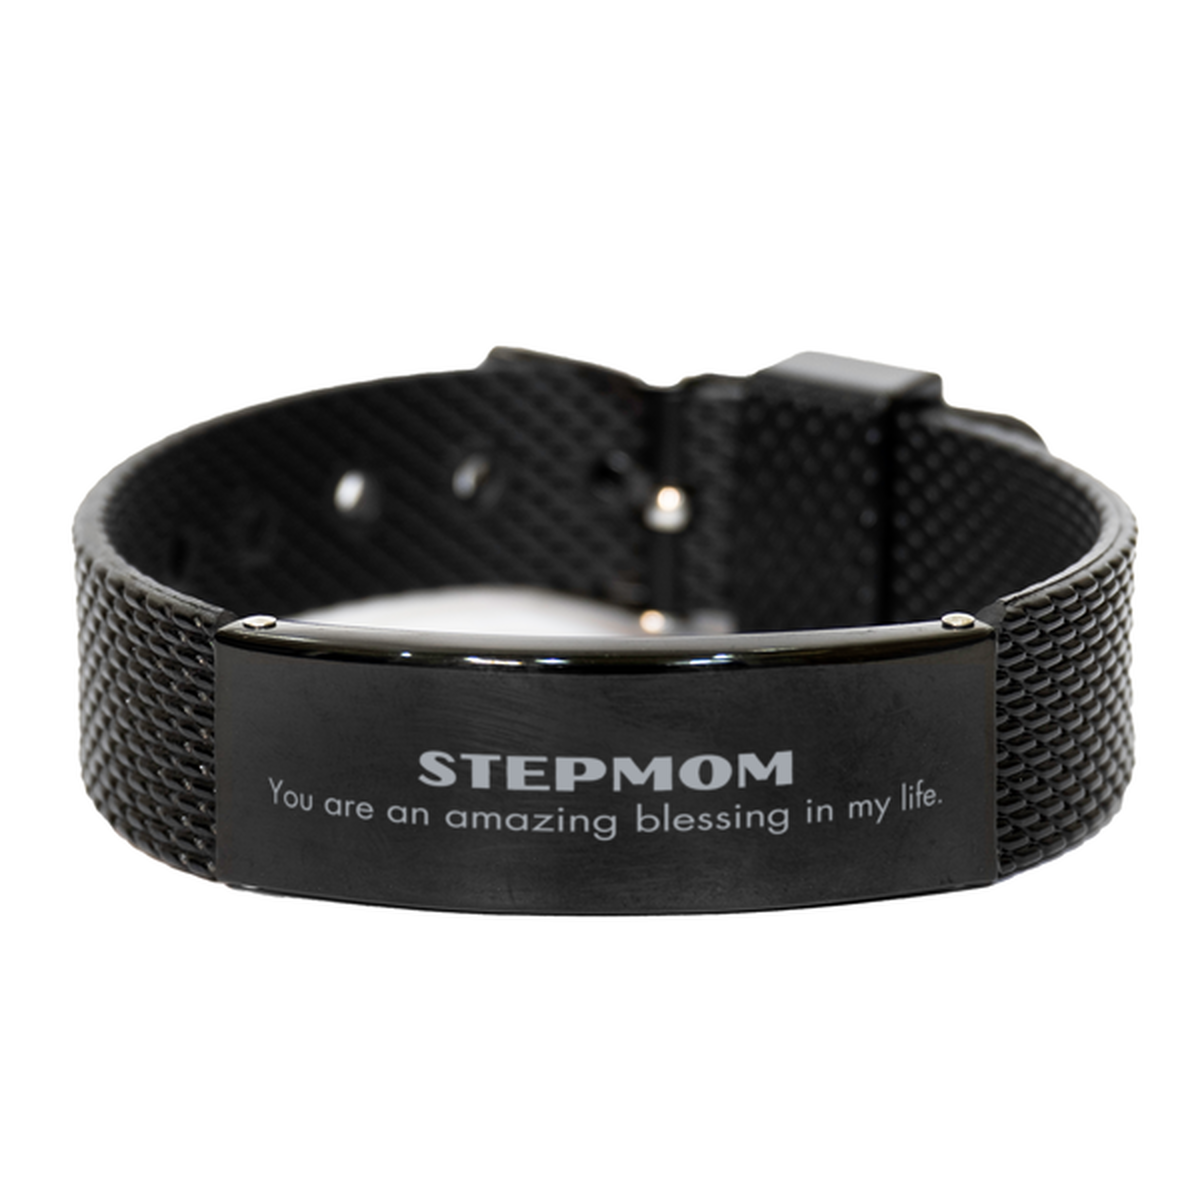 Stepmom Black Shark Mesh Bracelet, You are an amazing blessing in my life, Thank You Gifts For Stepmom, Inspirational Birthday Christmas Unique Gifts For Stepmom